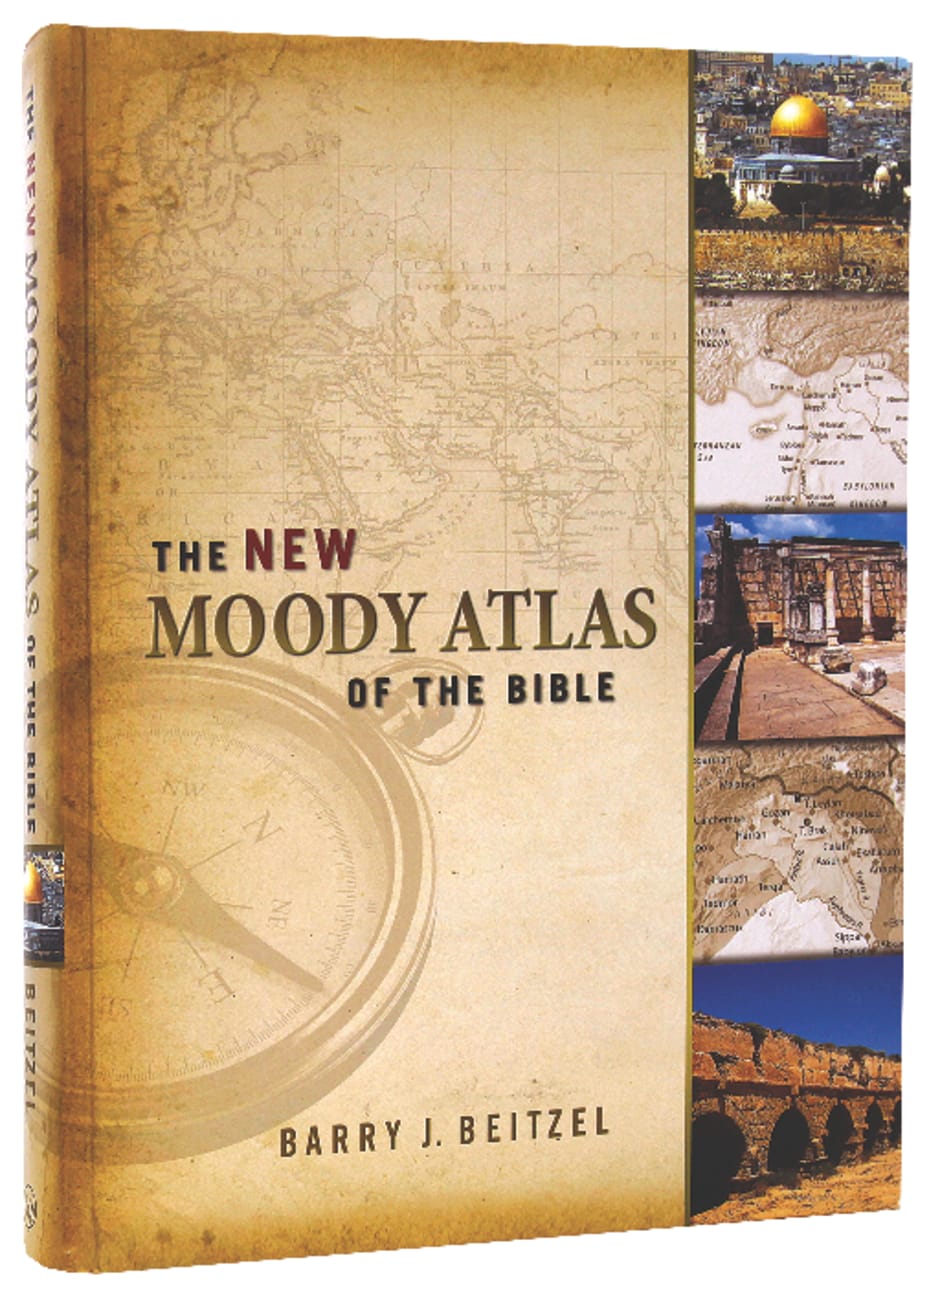 The New Moody Atlas of the Bible by Barry Beitzel Koorong